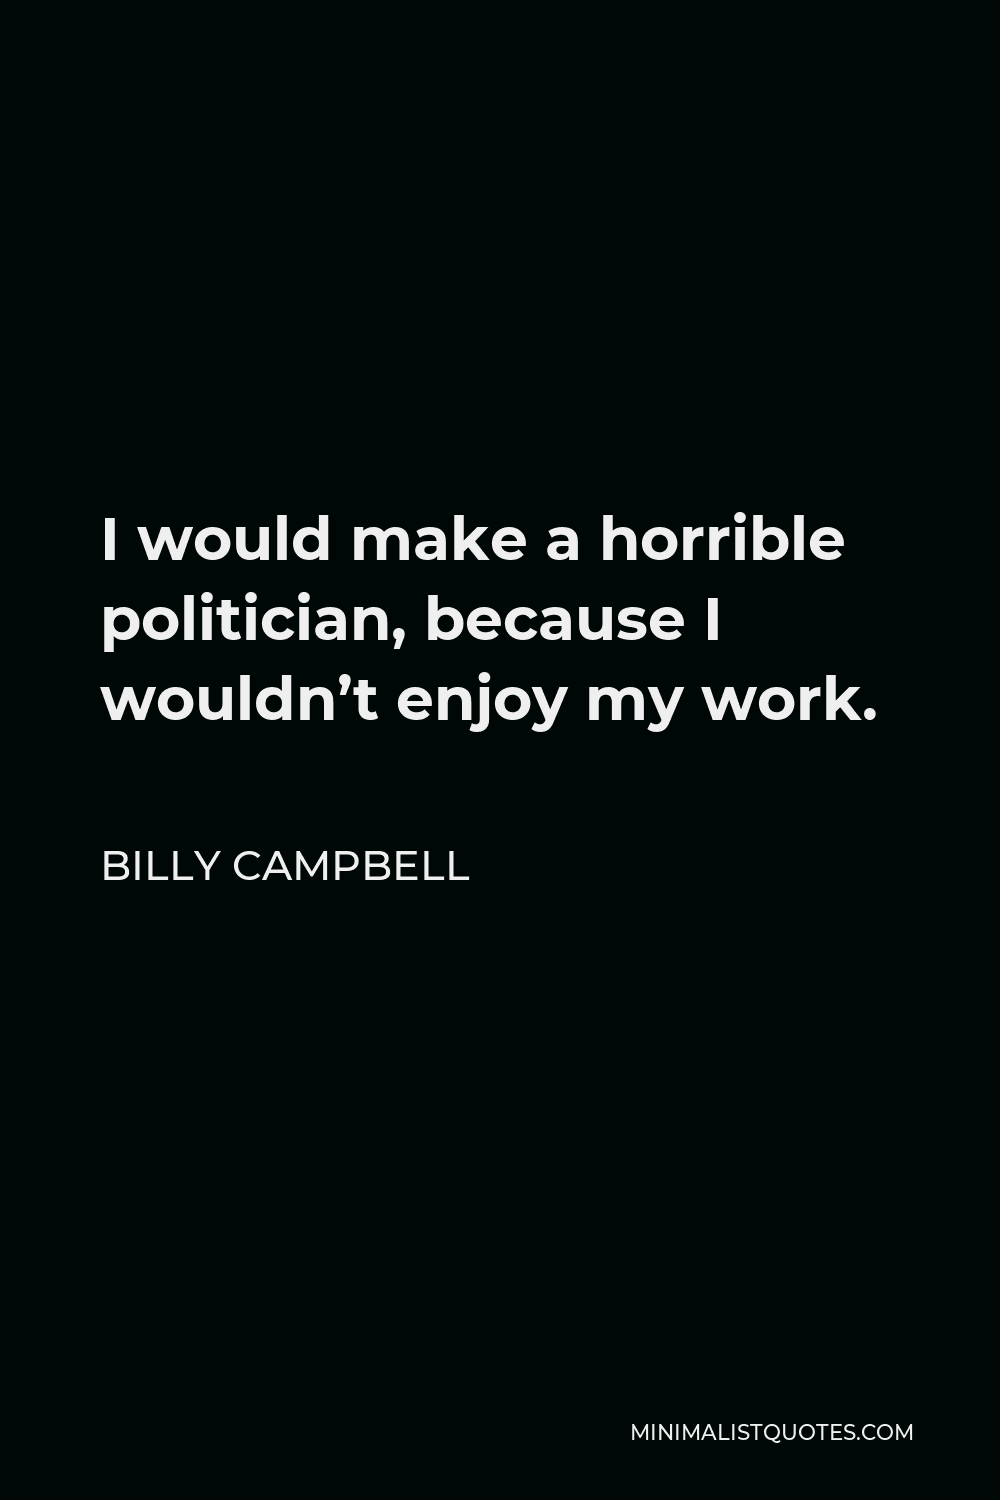 Billy Campbell Quote - I would make a horrible politician, because I wouldn’t enjoy my work.